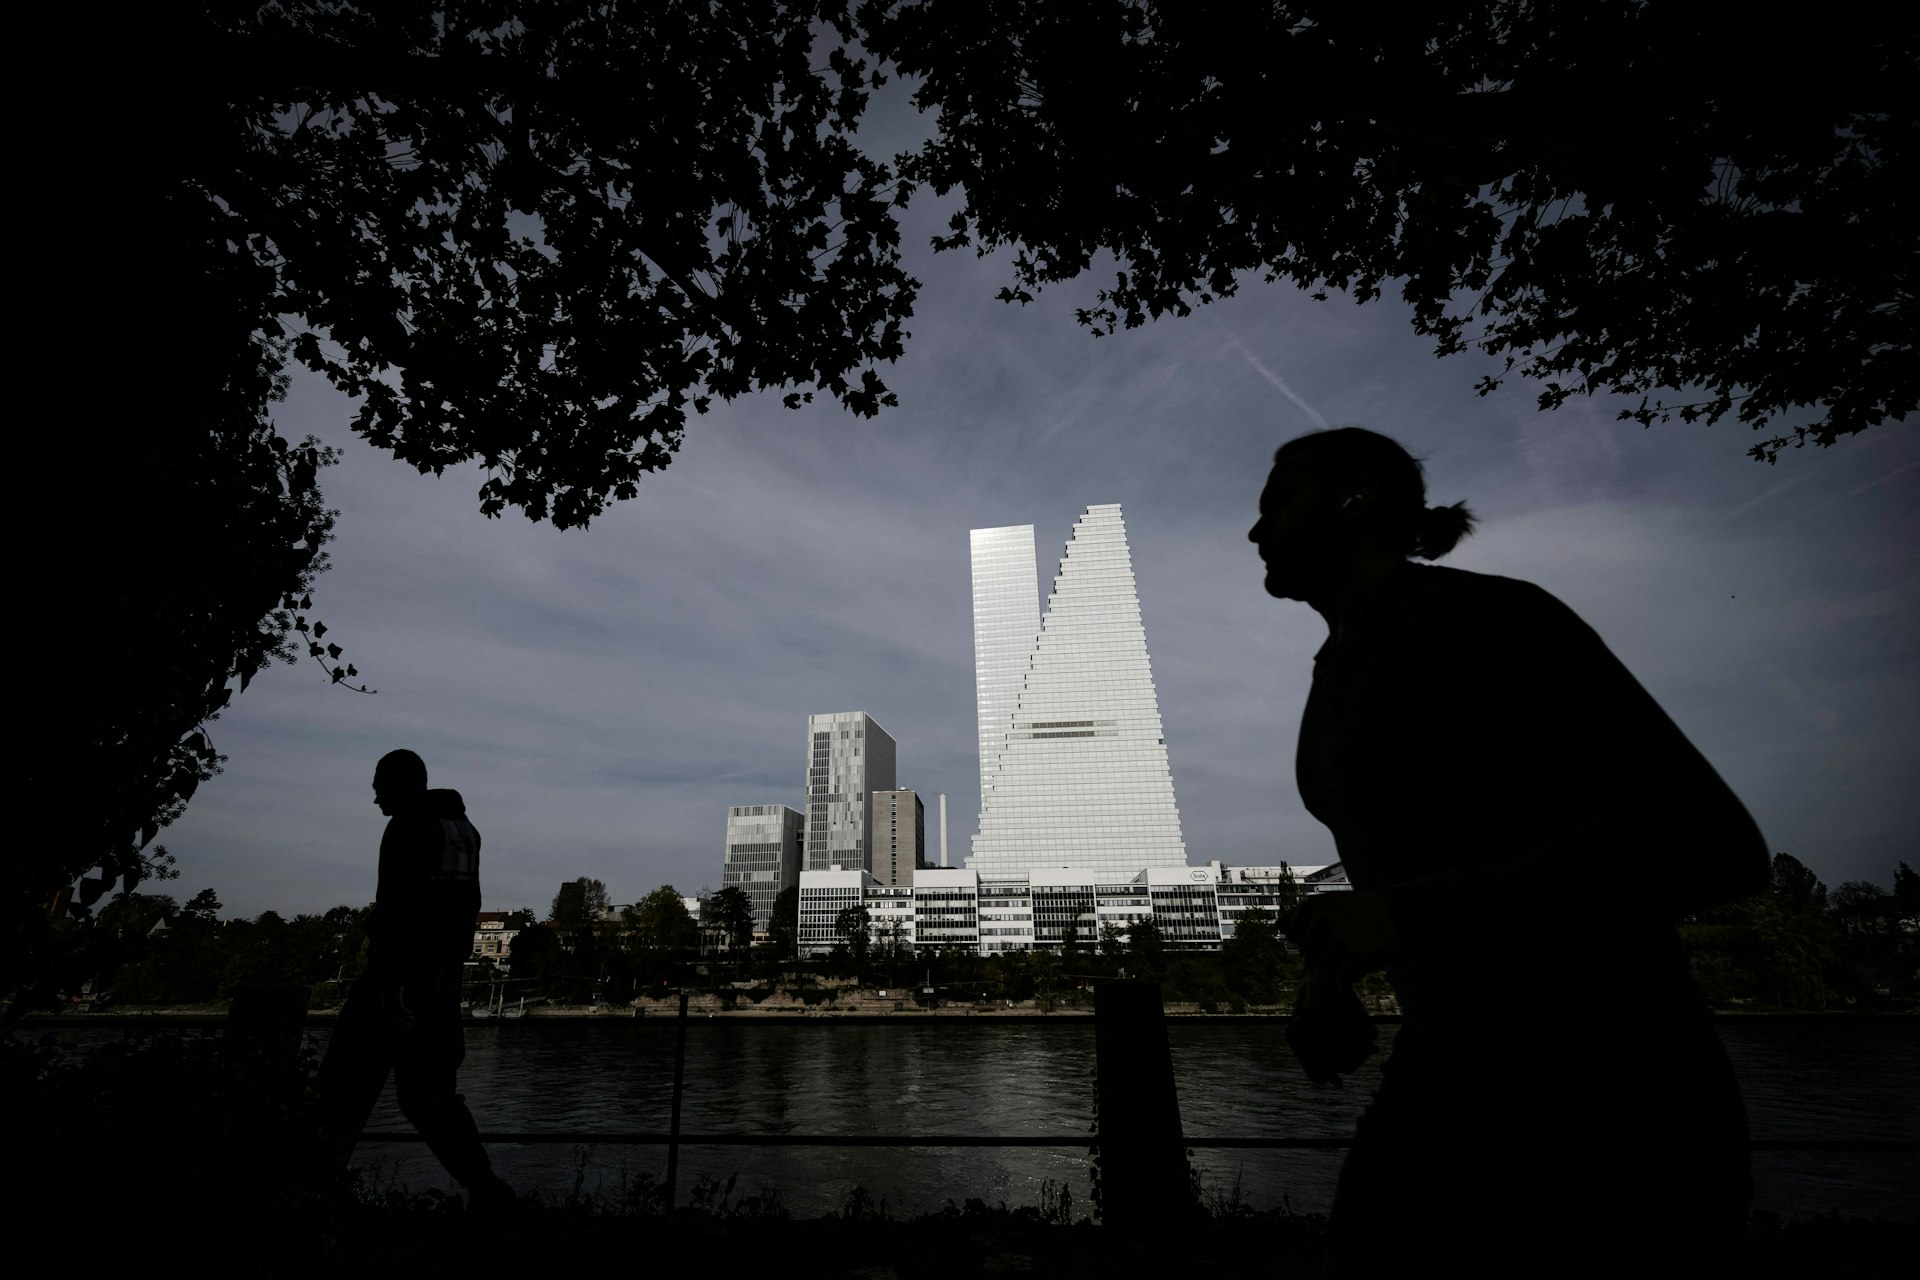 Passers-by are silhouetted as they walk along the banks of the River Rhine next to the Roche Towers, Basel, Switzerland